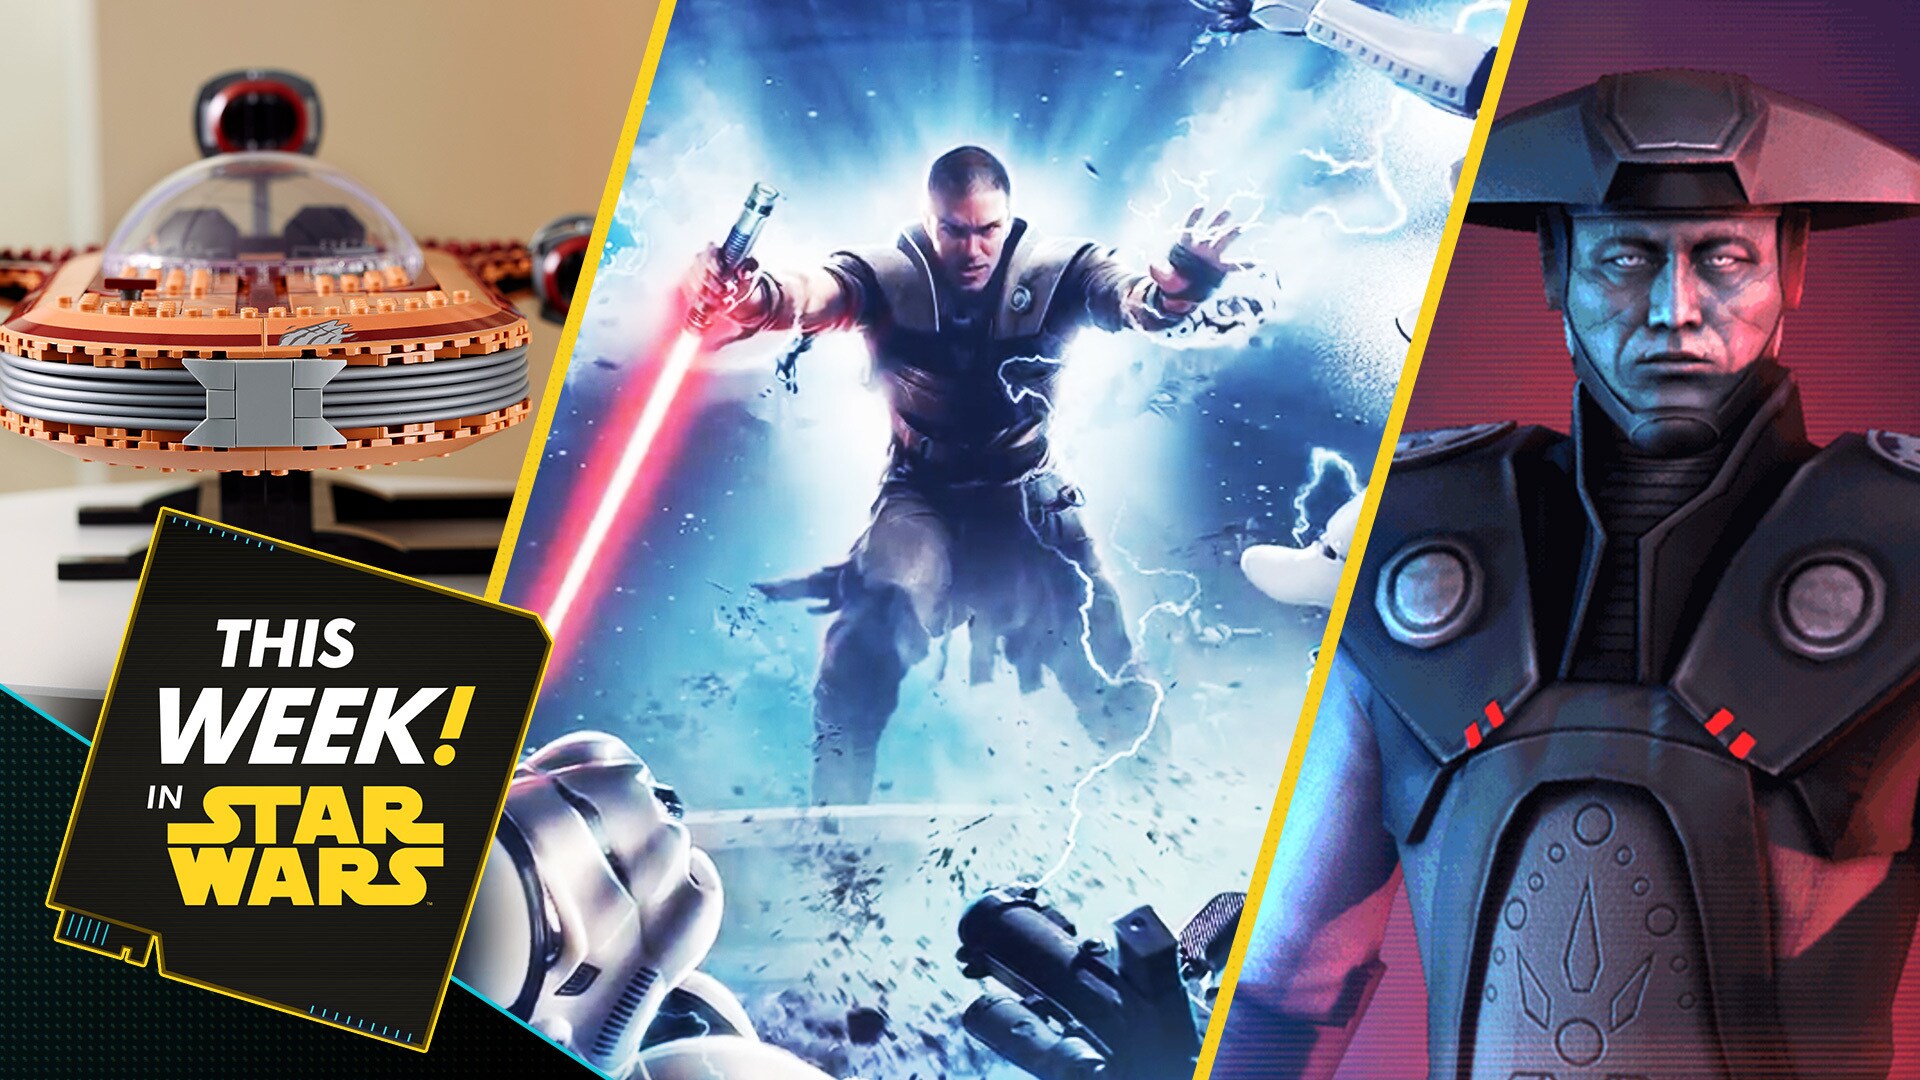 New Star Wars Video Game, Fifth Brother Joins Galaxy of Heroes, and More!